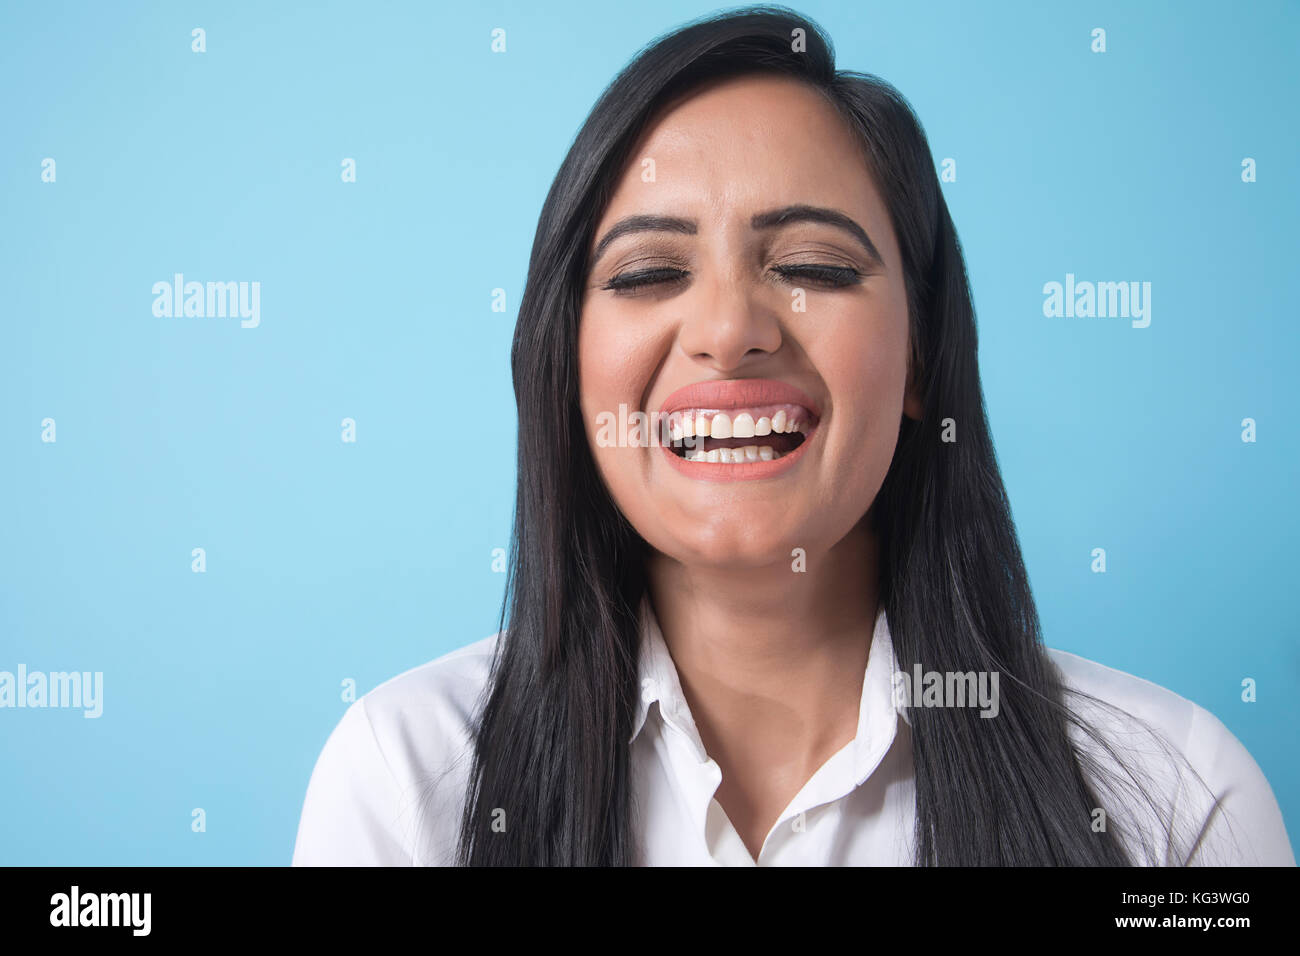 Portrait of smiling young businesswoman over blue background Stock Photo